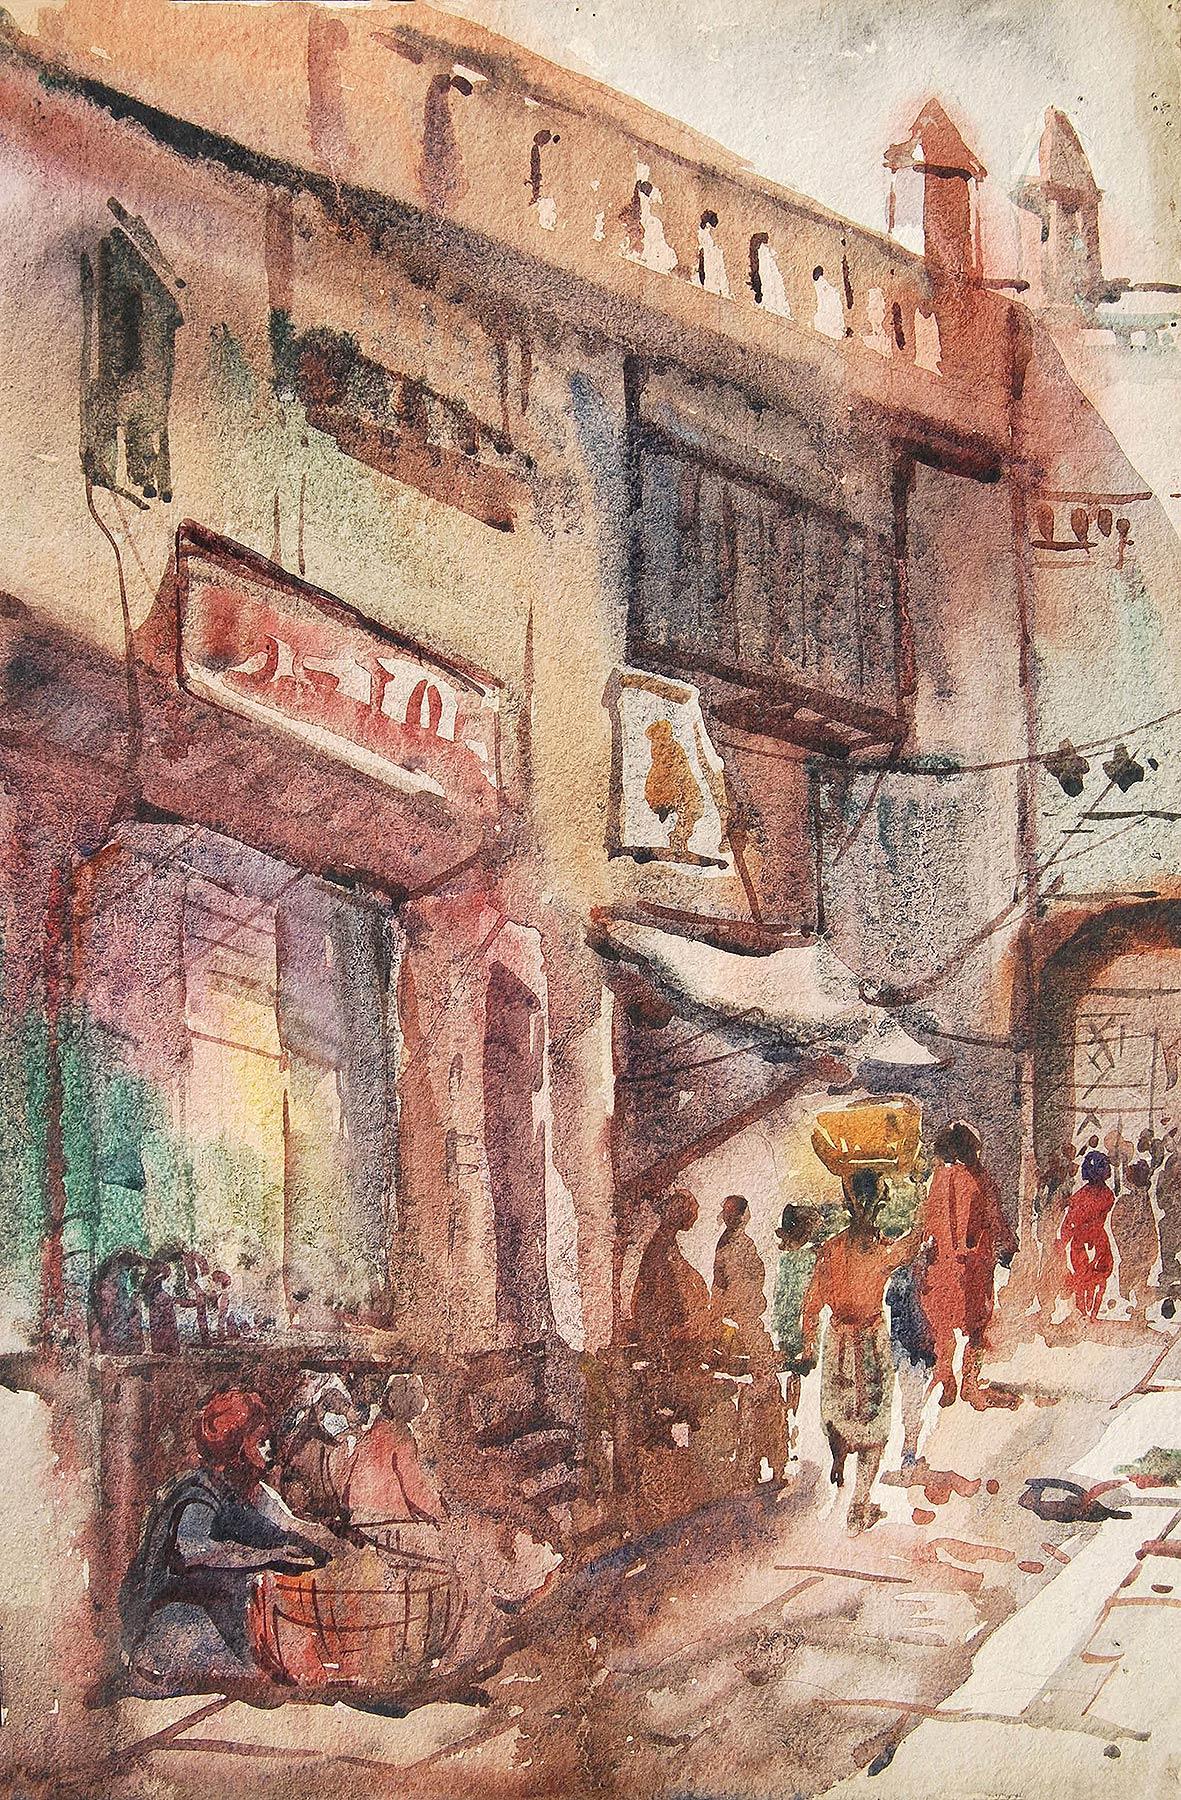 Benaras, Holy City, Watercolor Painting, Red, Brown, Blue by Sunil Das"In Stock"